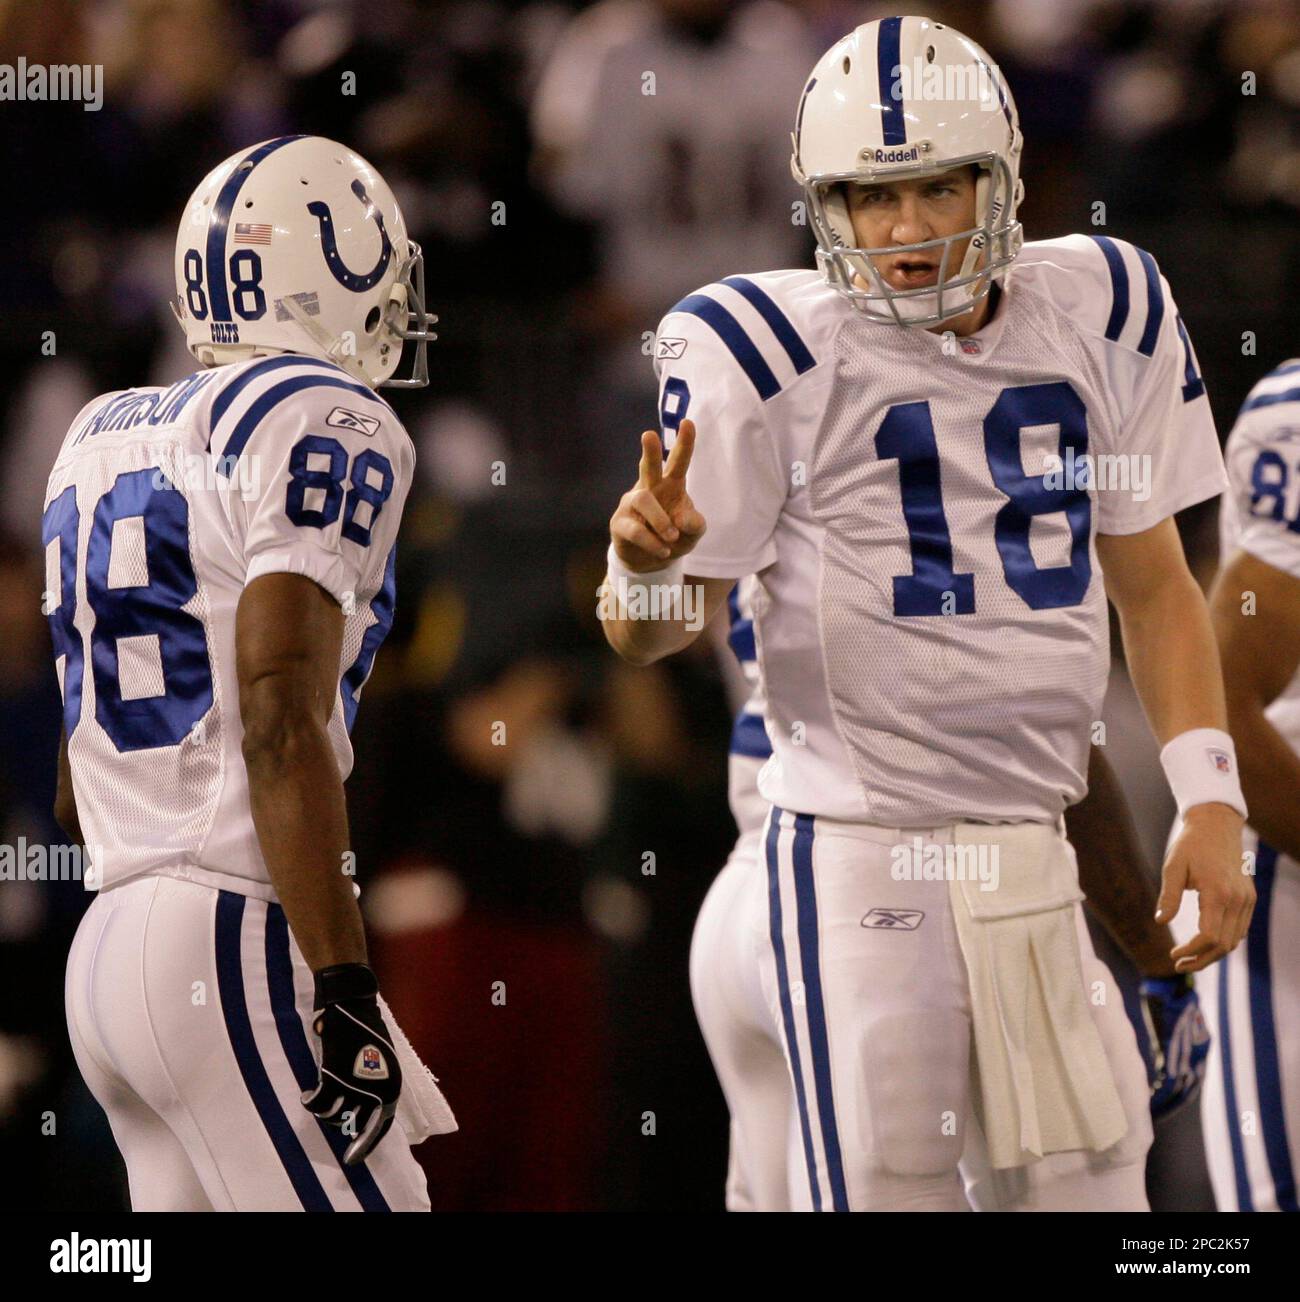 FOR USE AS DESIRED WITH SUPER BOWL XLI STORIES ** Indianapolis Colts  quarterback Peyton Manning (18) speaks with wide receiver Marvin Harrison  during the AFC divisional playoff football game against the